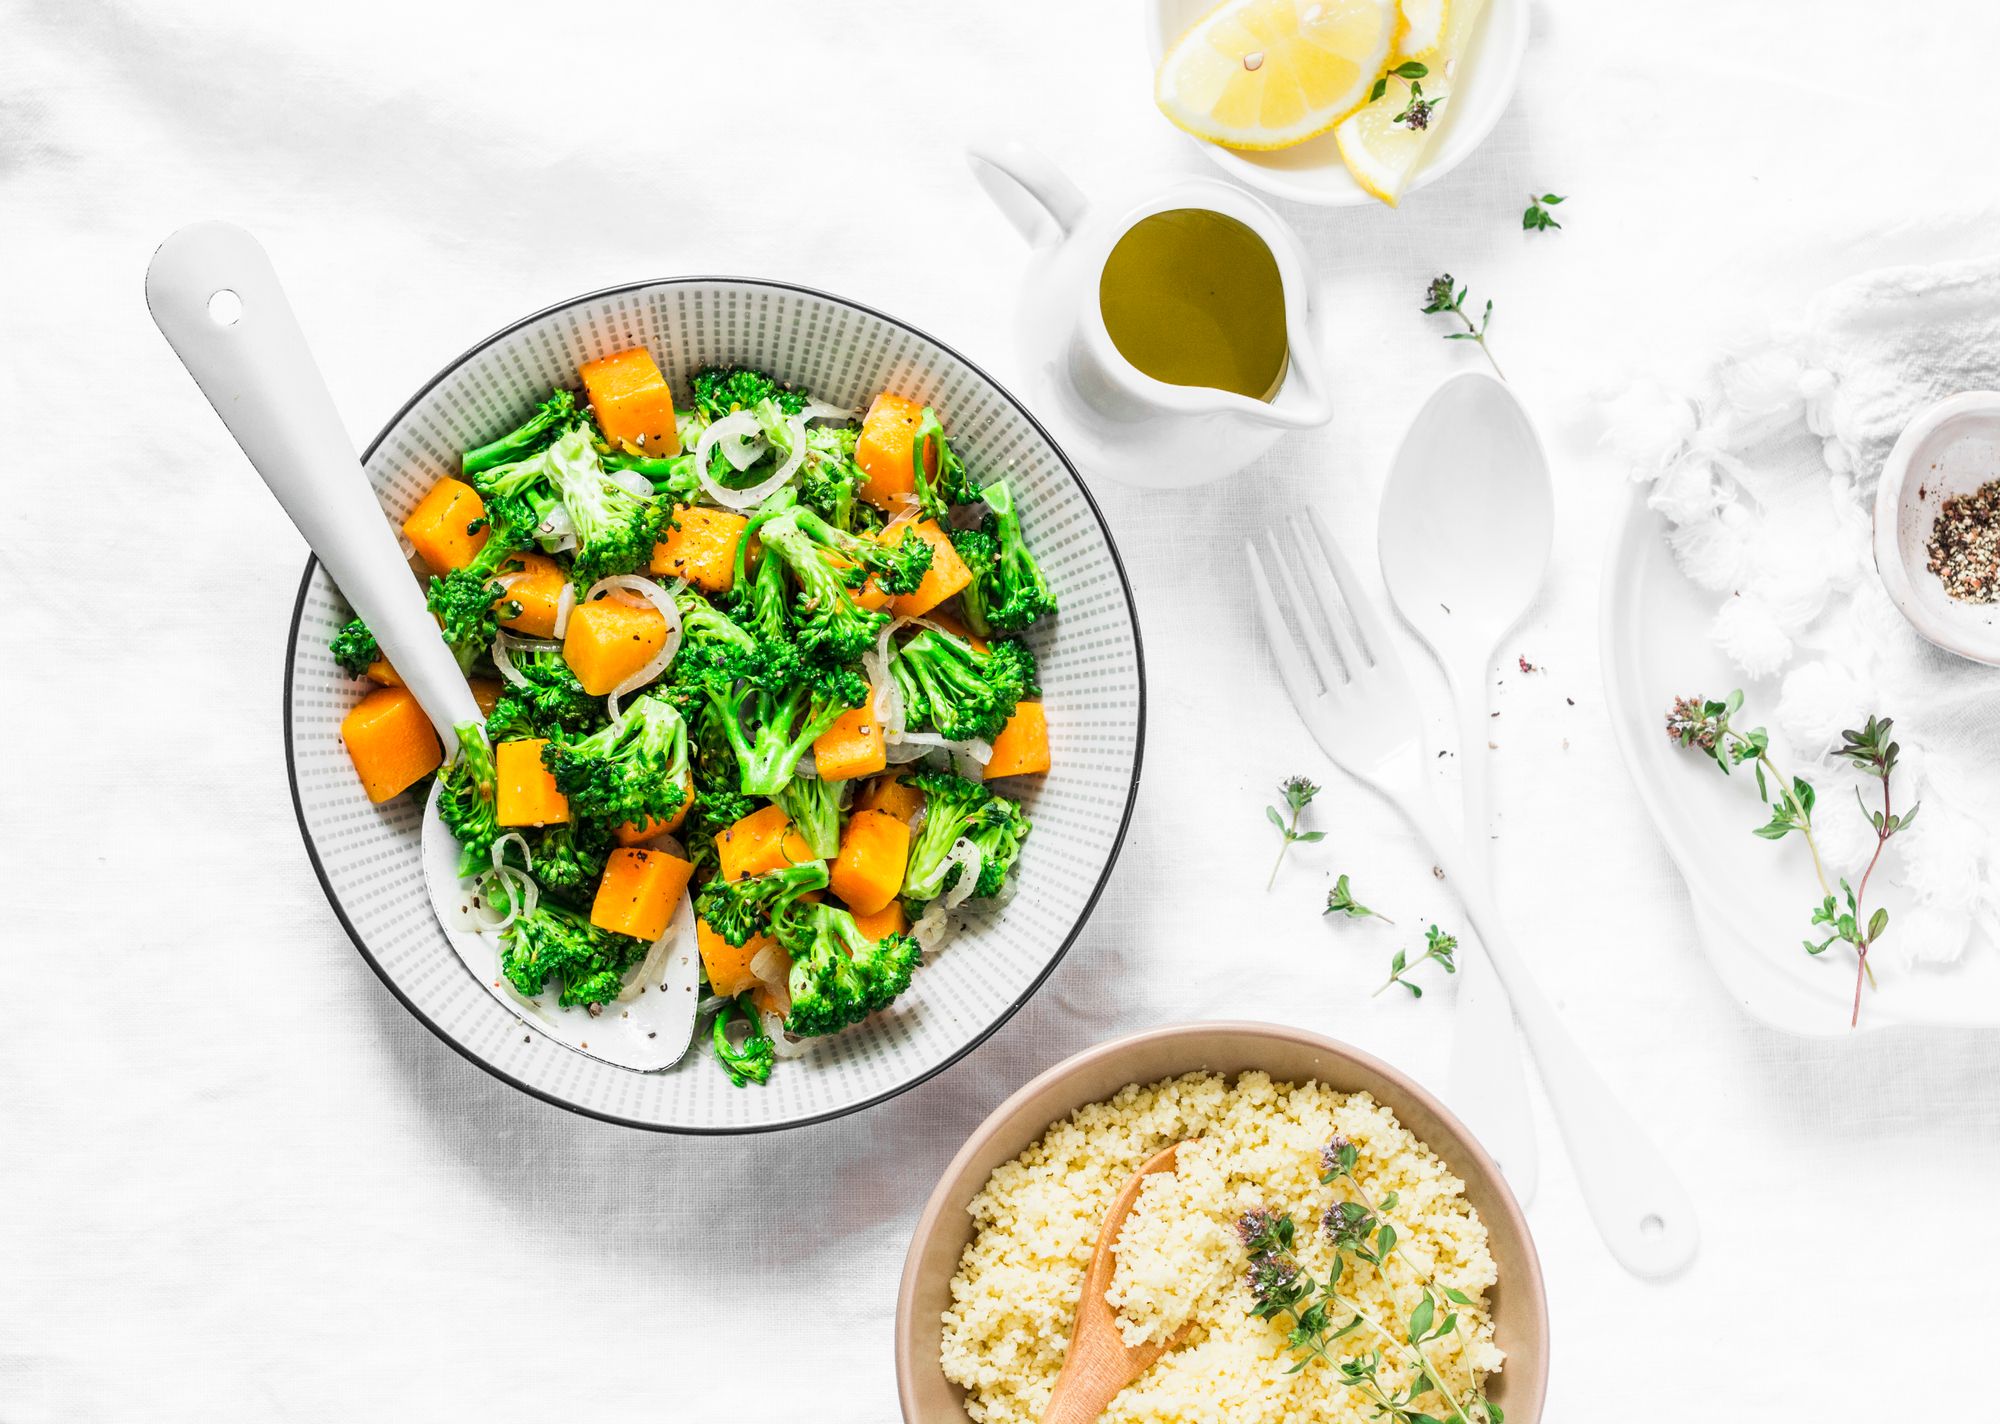 Kale, Broccoli, and Couscous with Tahini